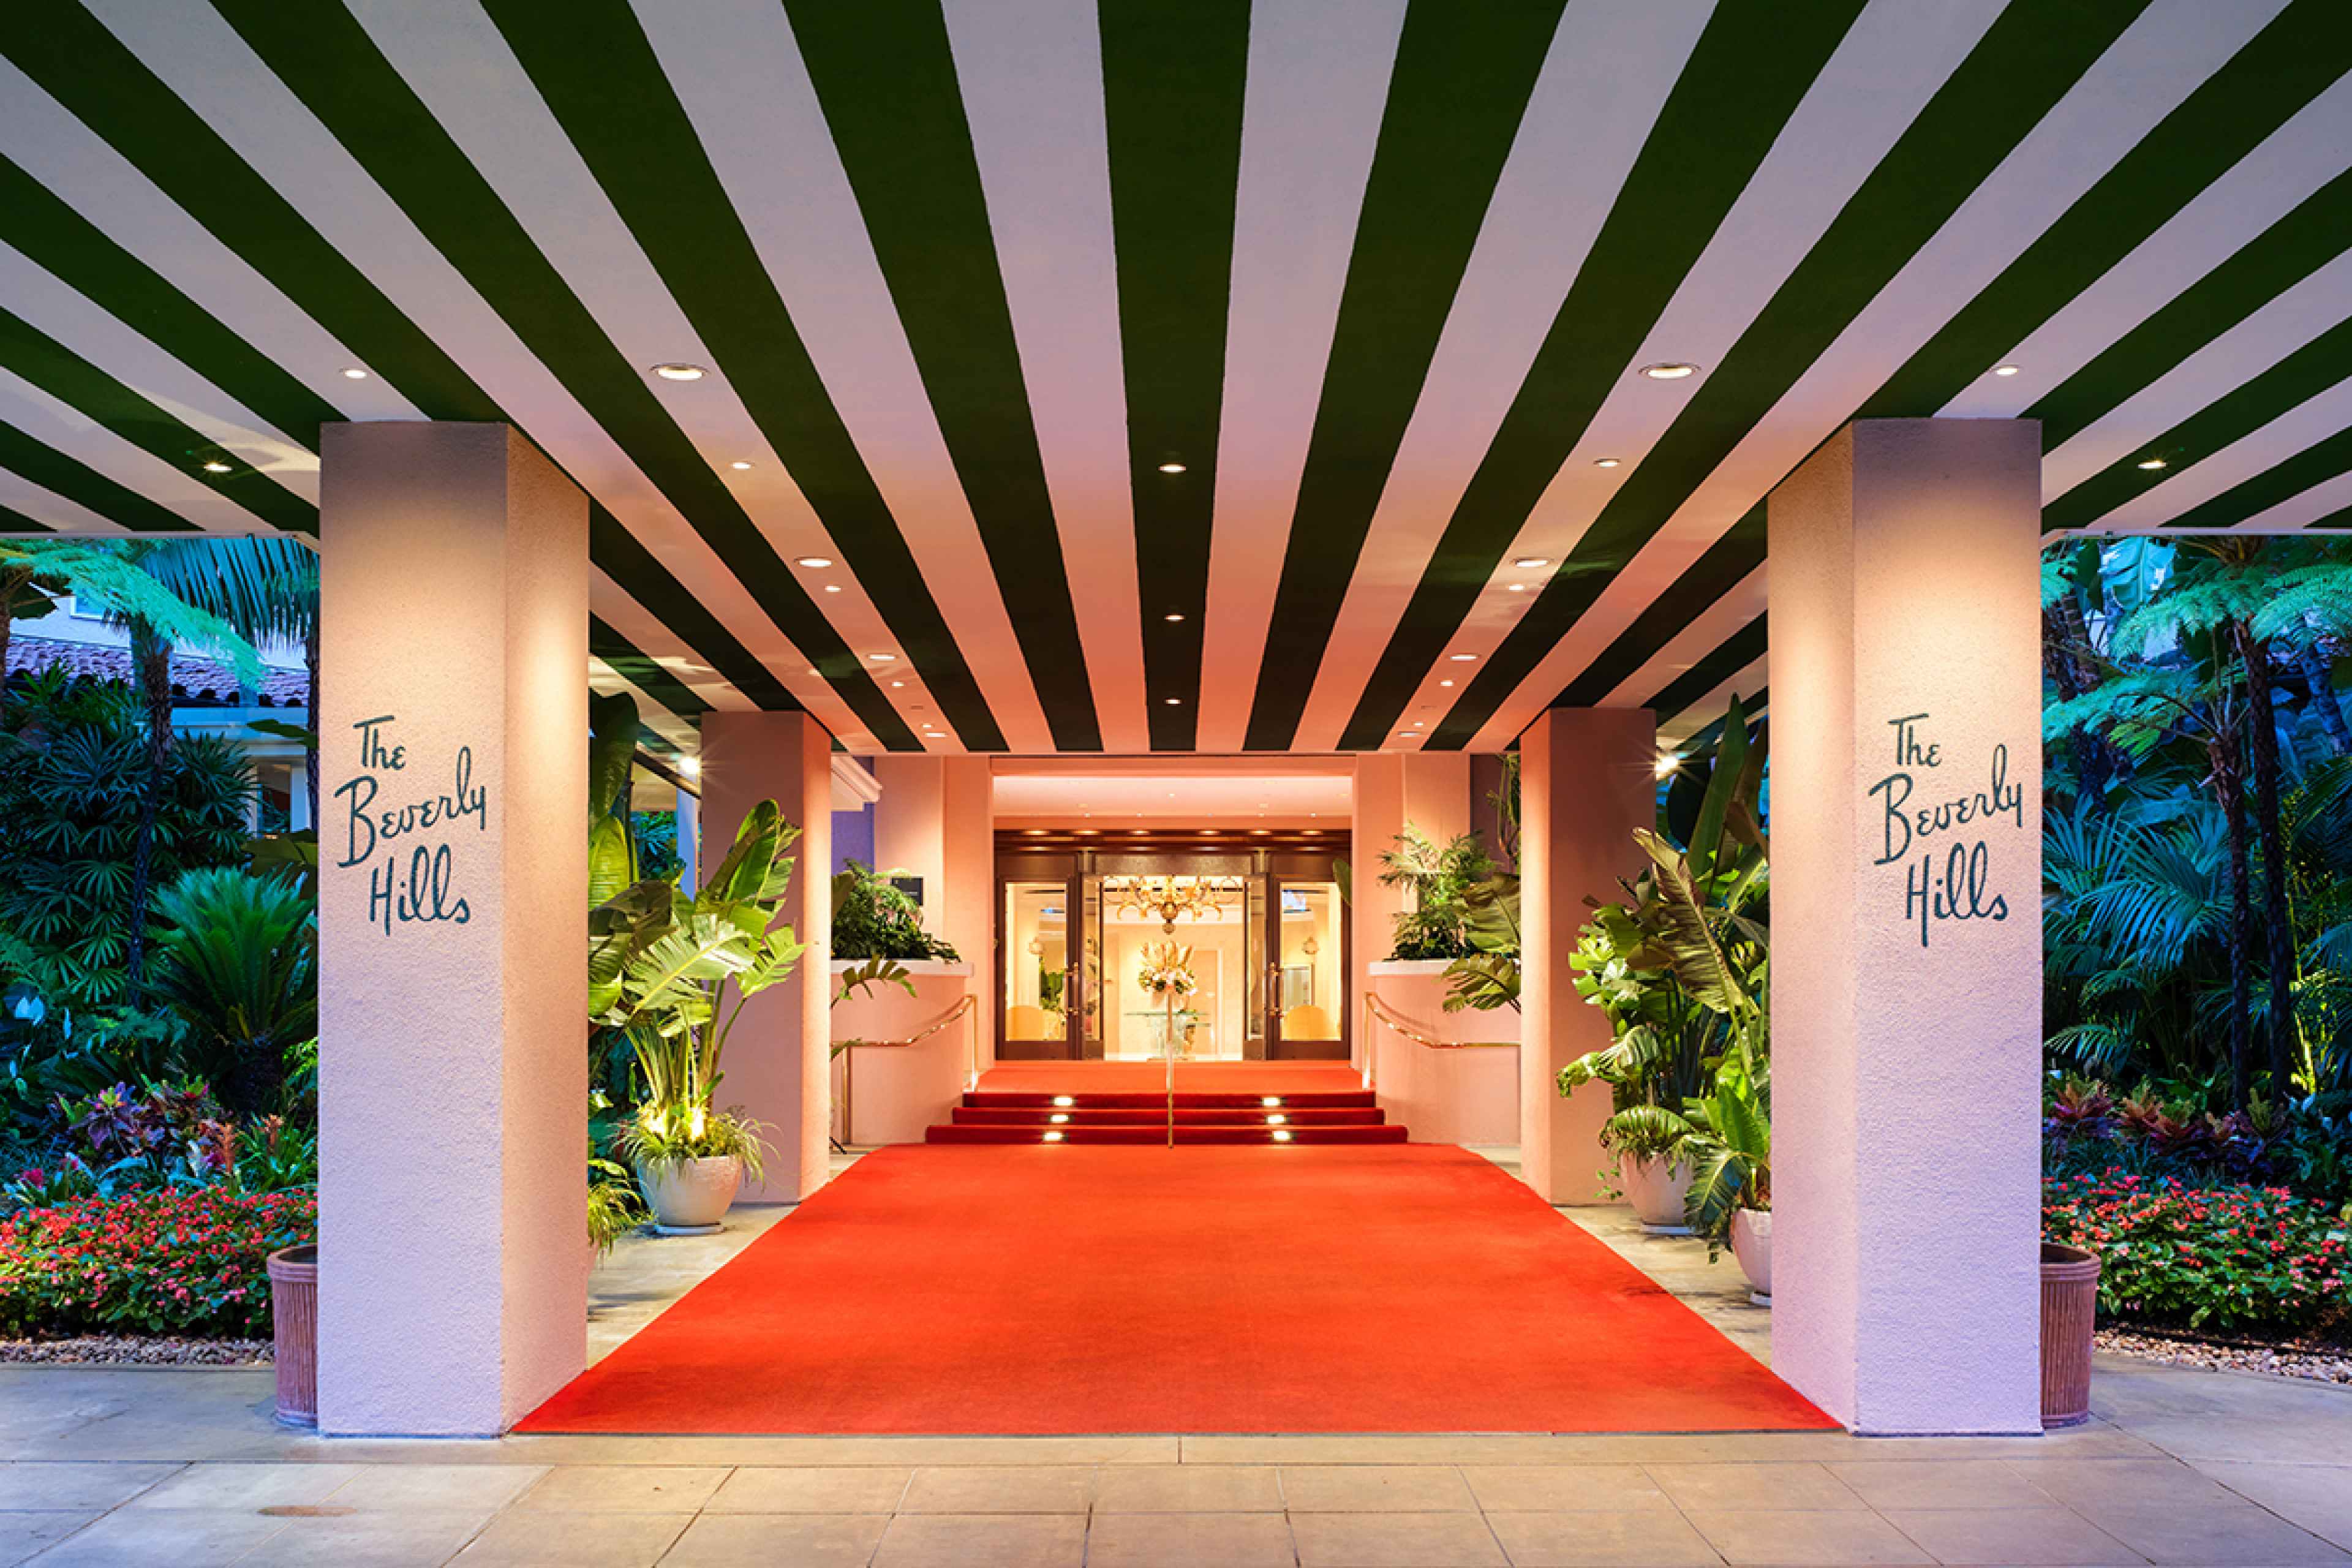 entrance to hotel with red carpet and brown and pink striped ceiling